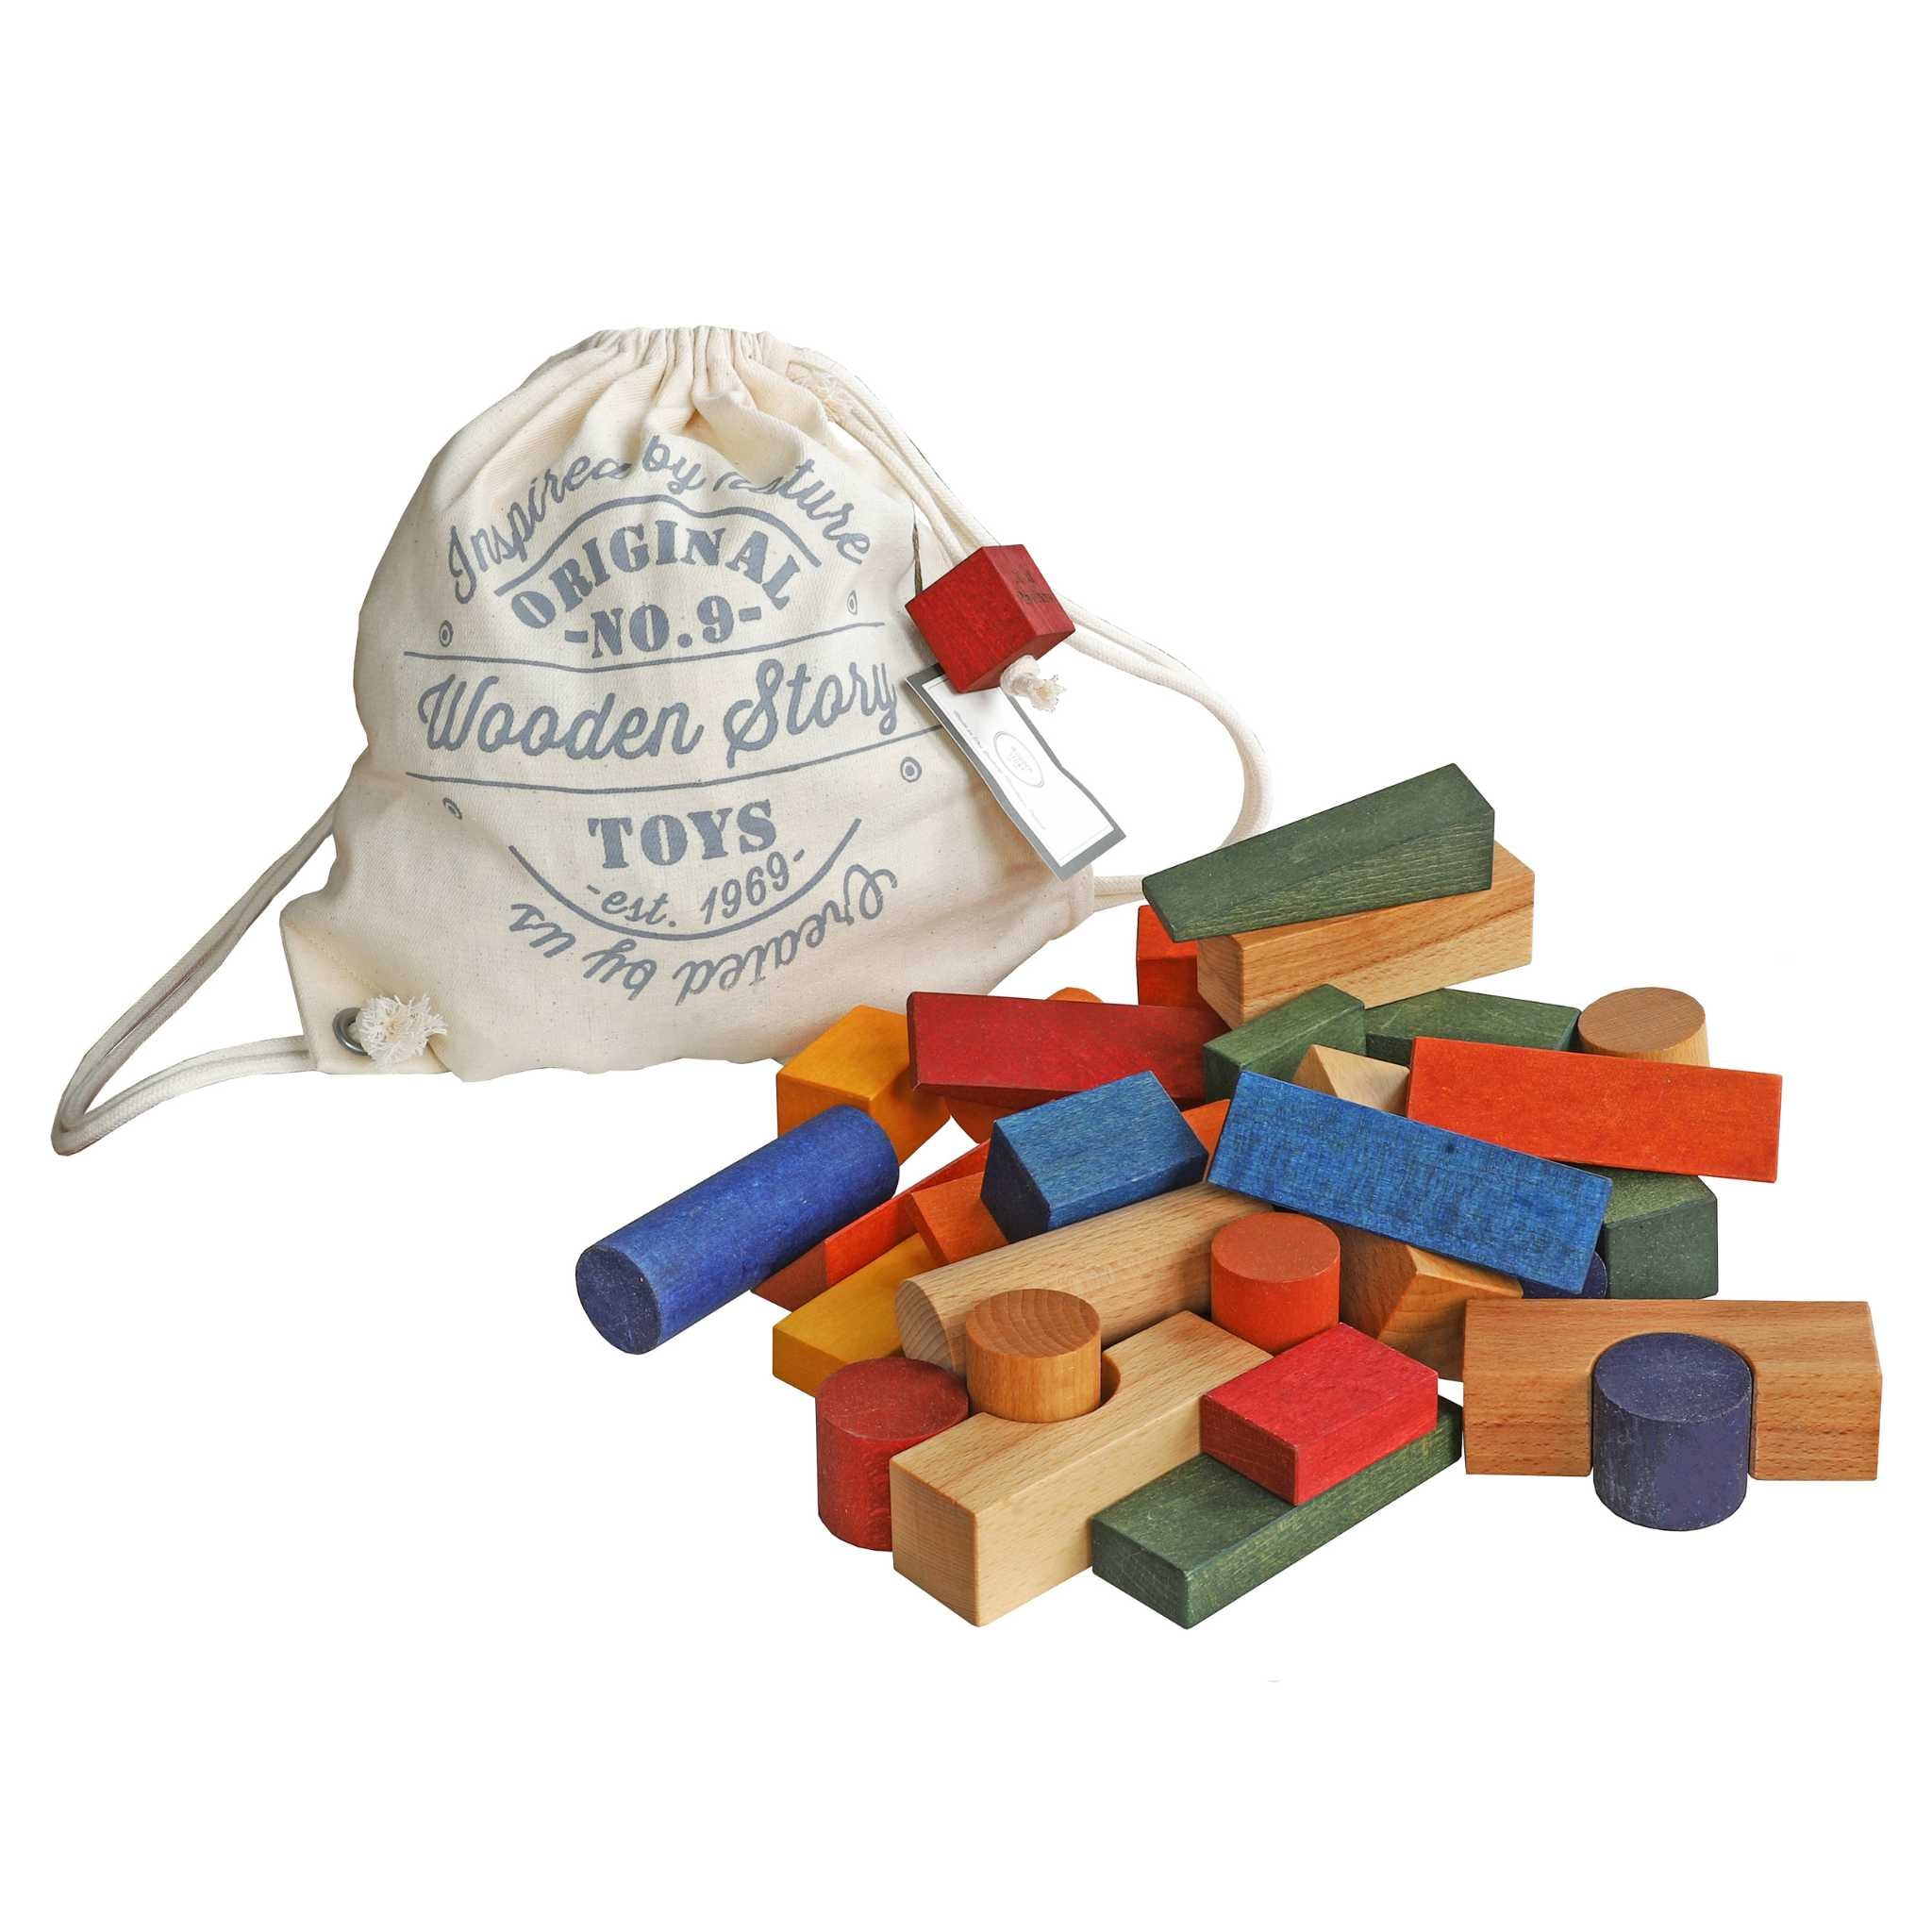 Wooden Story Rainbow Blocks - XL 30 pieces in Sack 